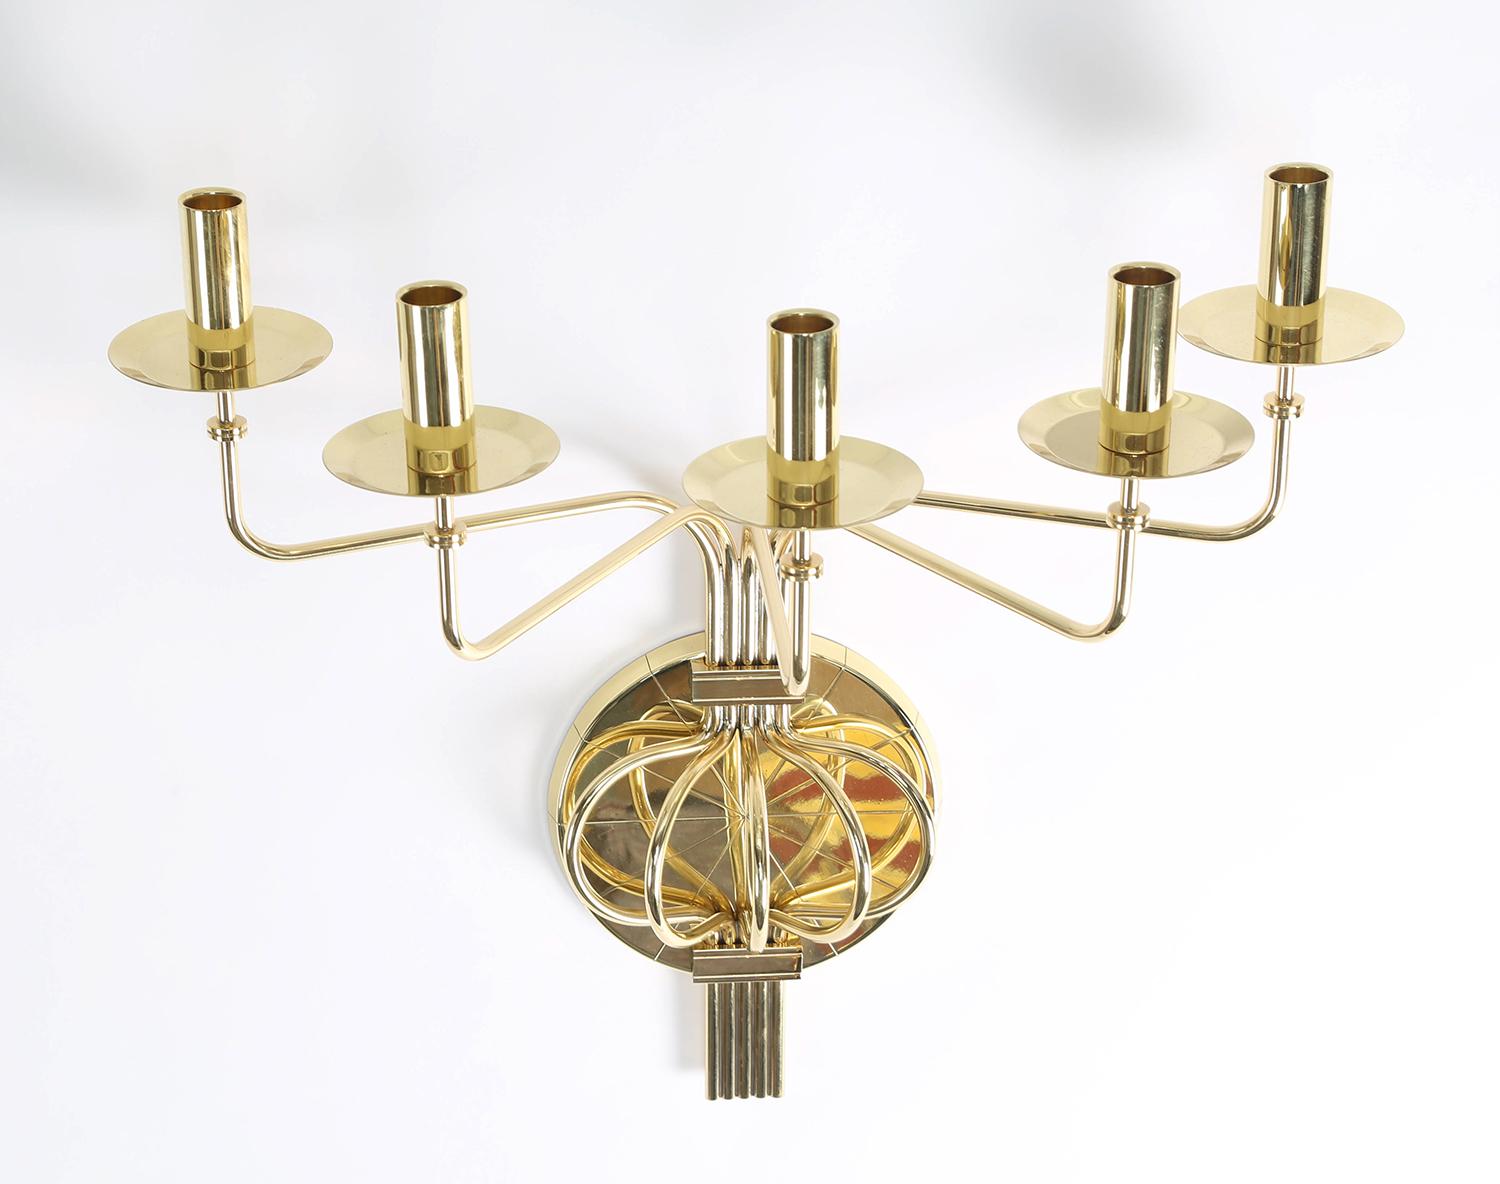 Mid-Century Modern Tommi Parzinger Pair of Impressive 5 Arm Wall Sconces in Polished Brass, 1950s For Sale